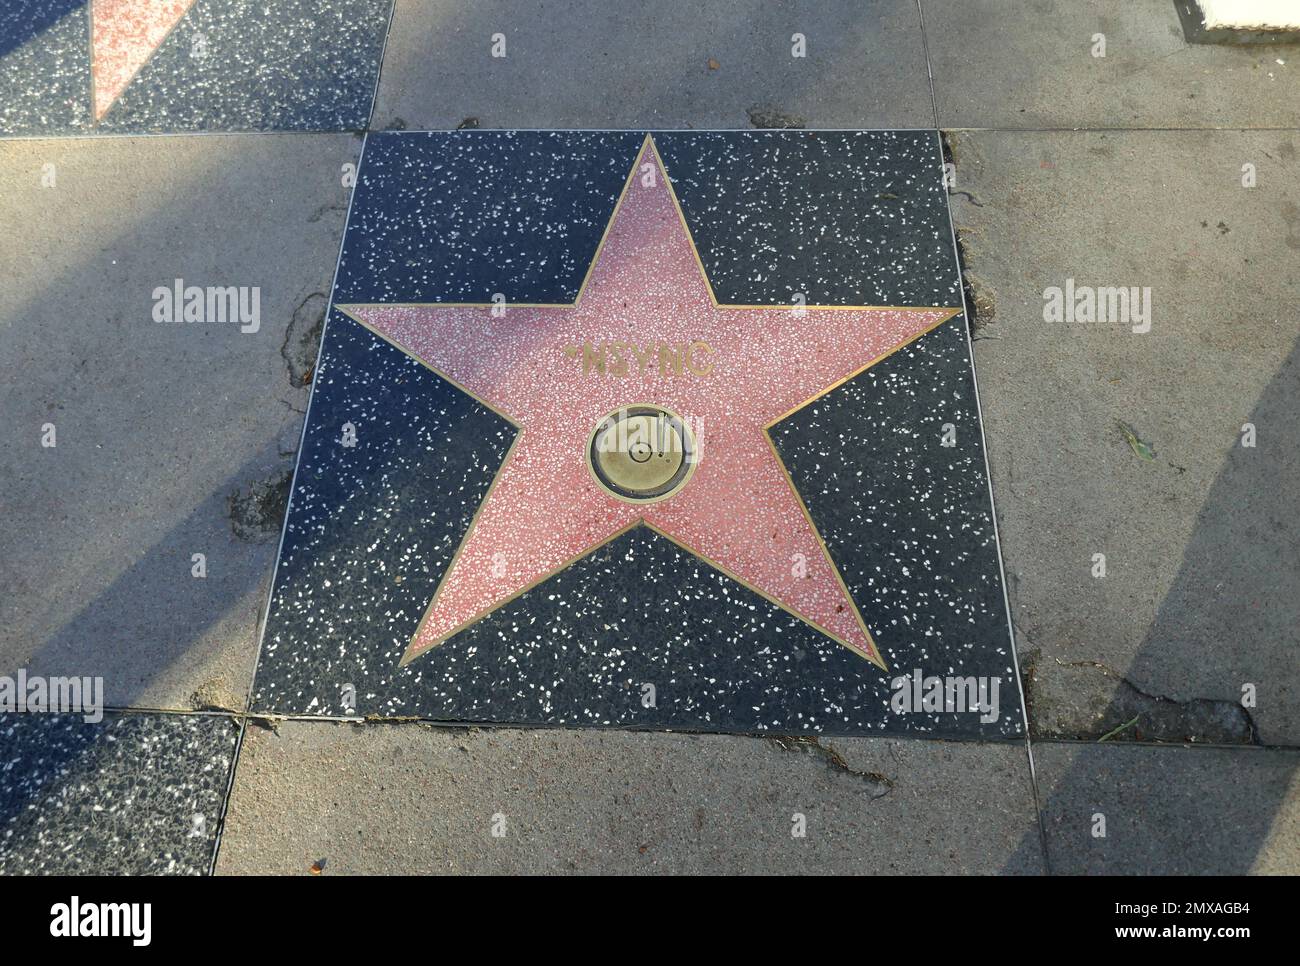 Los Angeles, California, USA 1st February 2023 A general view of atmosphere of N'Sync Hollywood Walk of Fame Star on February 1, 2023 in Los Angeles, California, USA. Photo by Barry King/Alamy Stock Photo Stock Photo